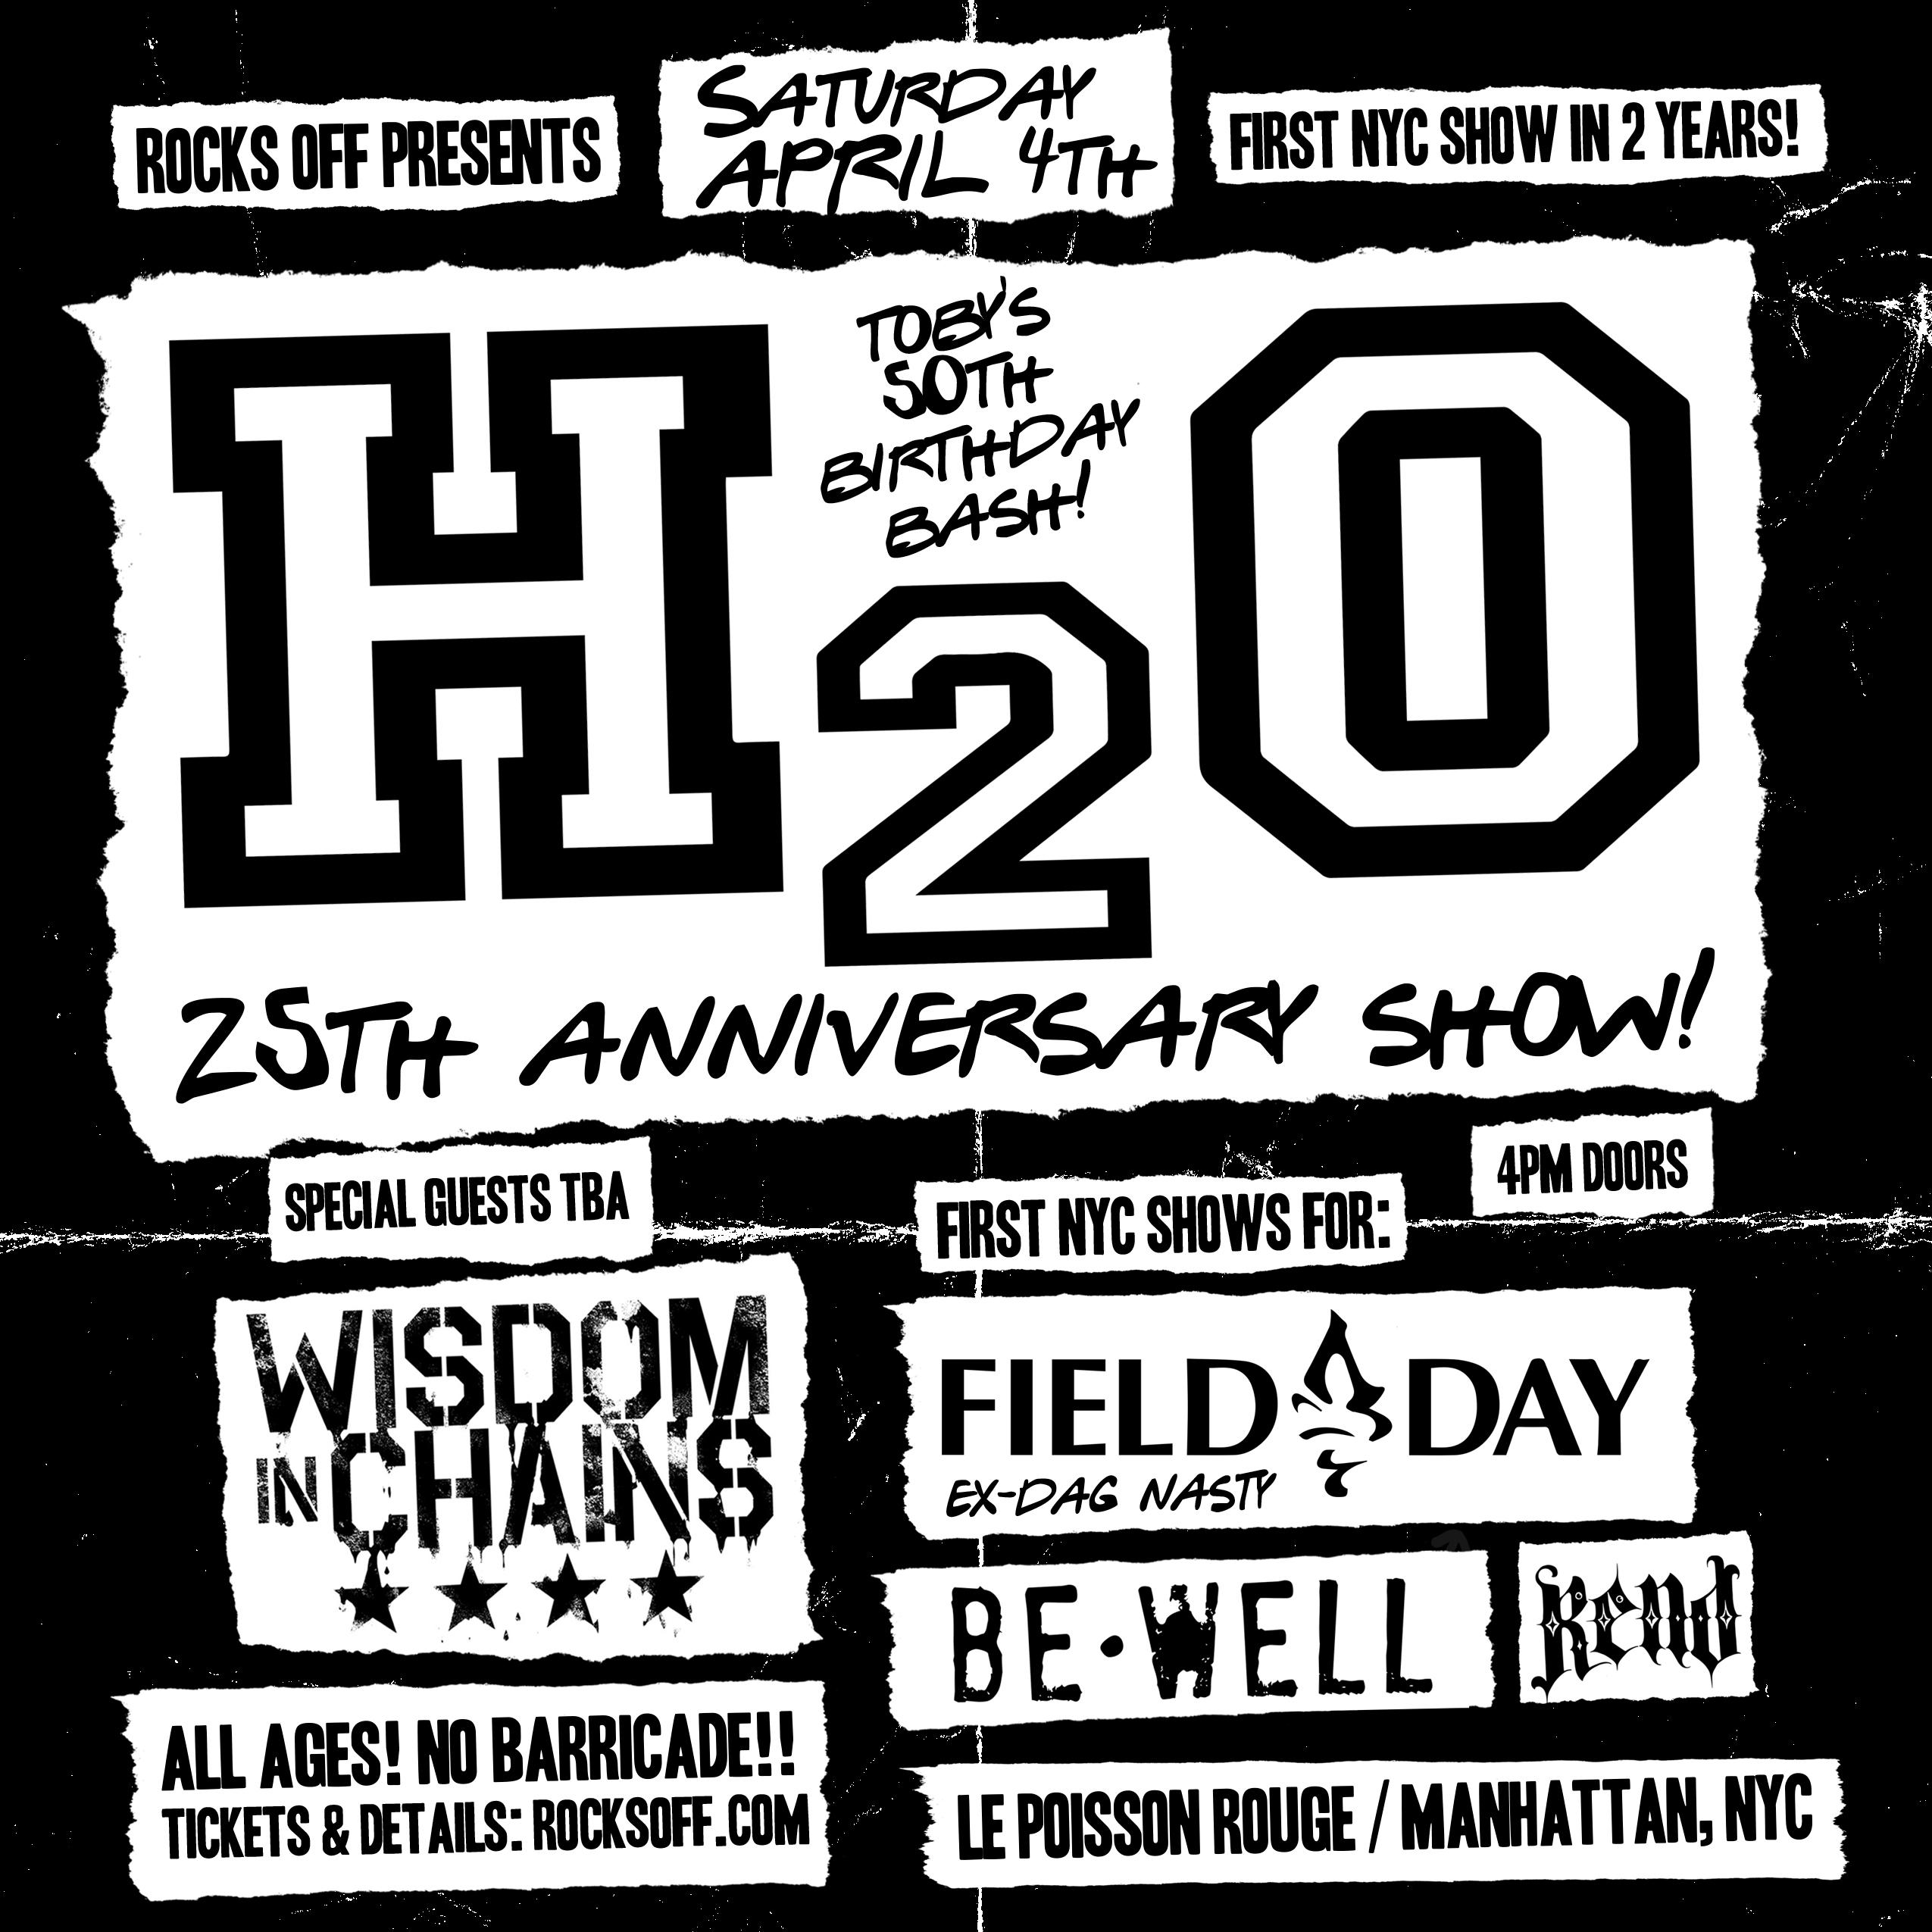 H2O 25th Anniversary Show w/ Wisdom in Chains, Field Day, Be Well, Rend